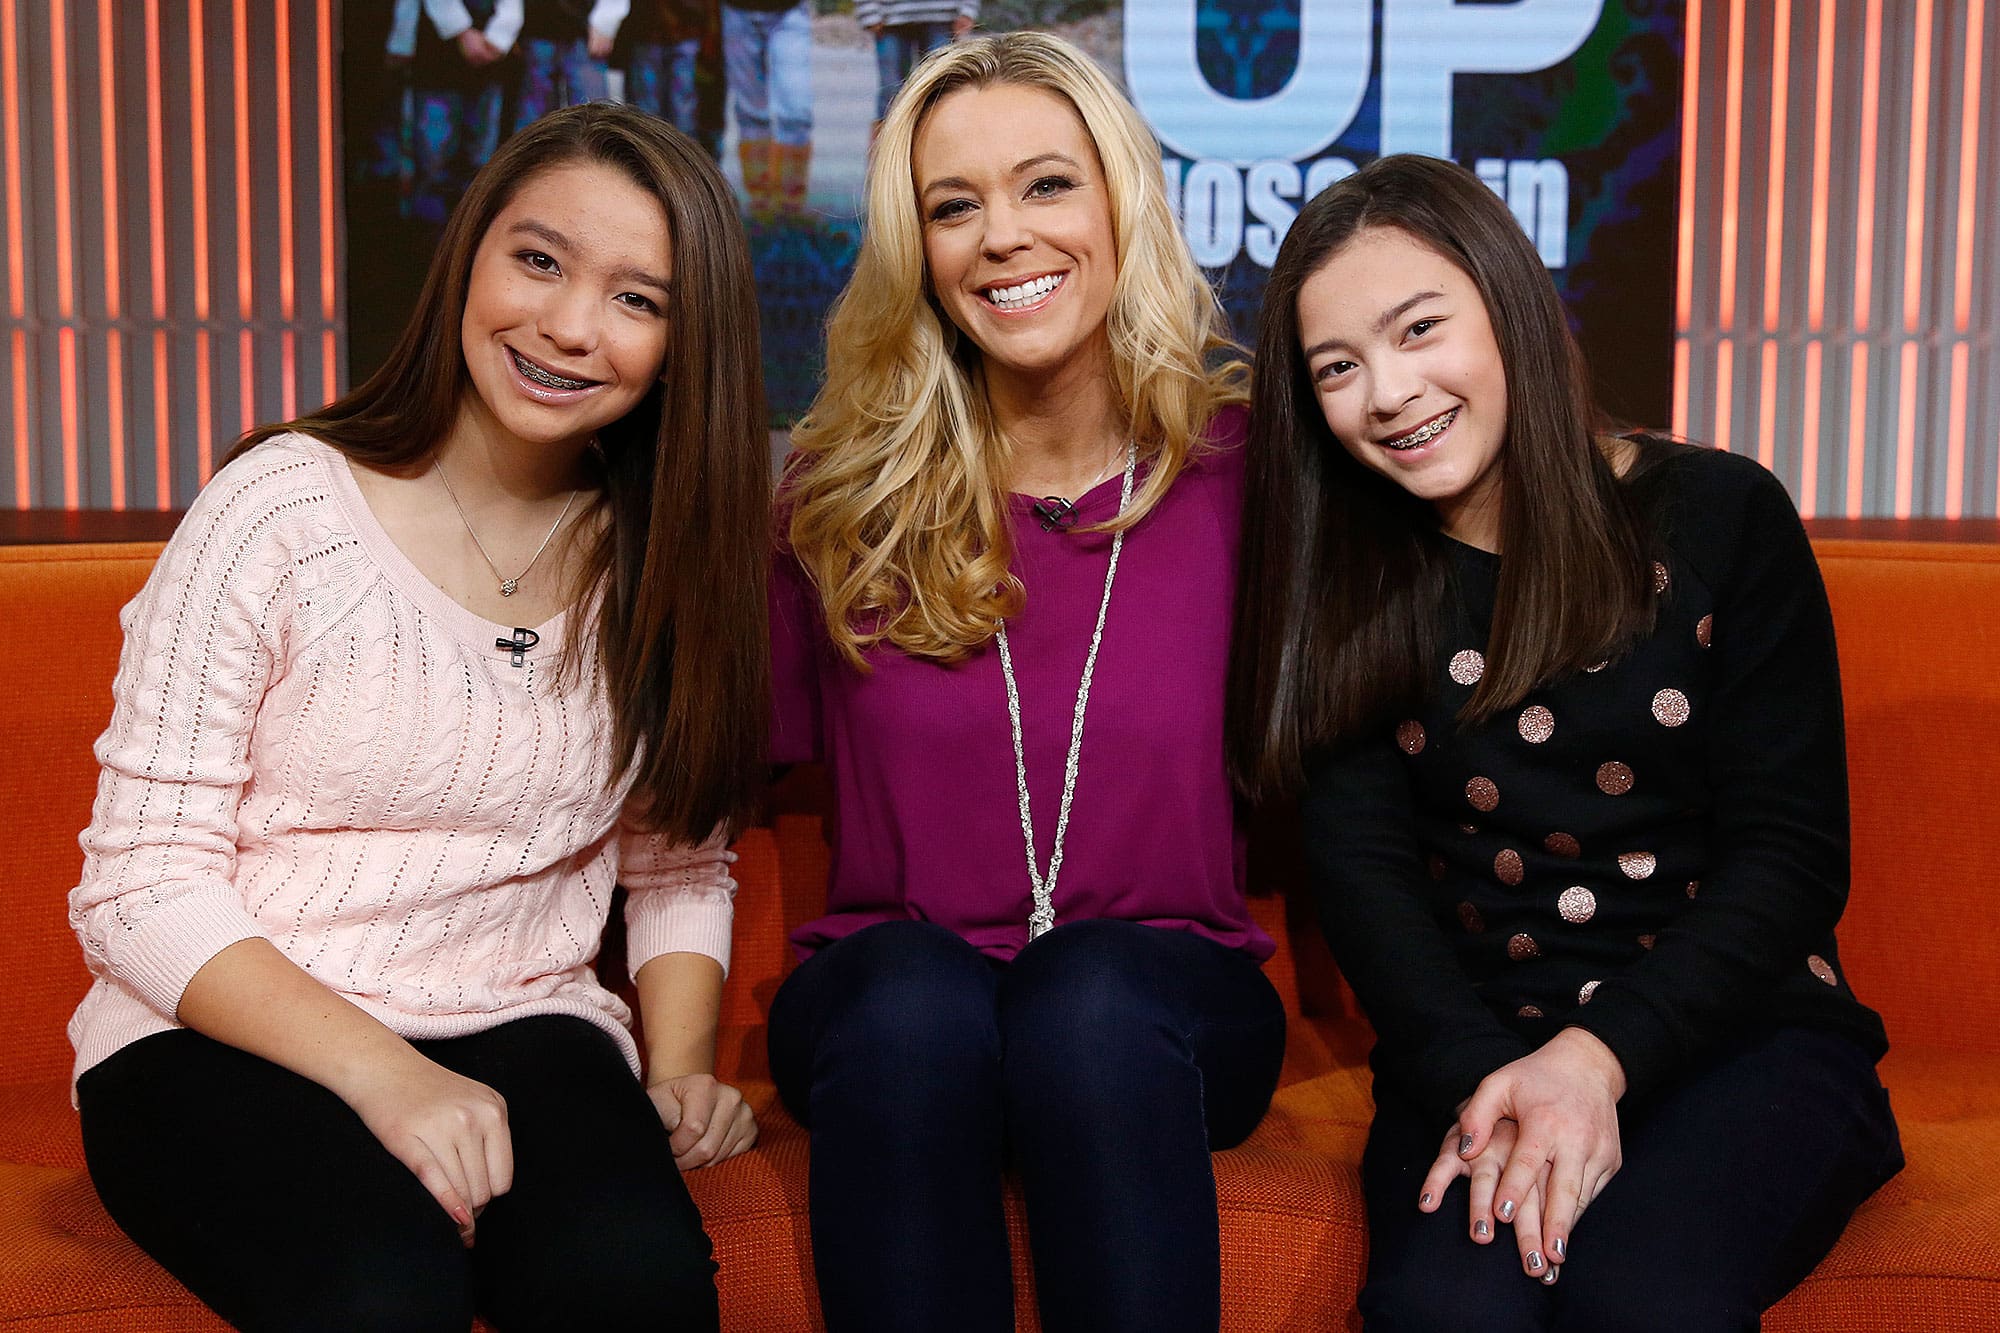 Kate Gosselin Says Twins Mady And Cara Could Get Their Own SpinOff